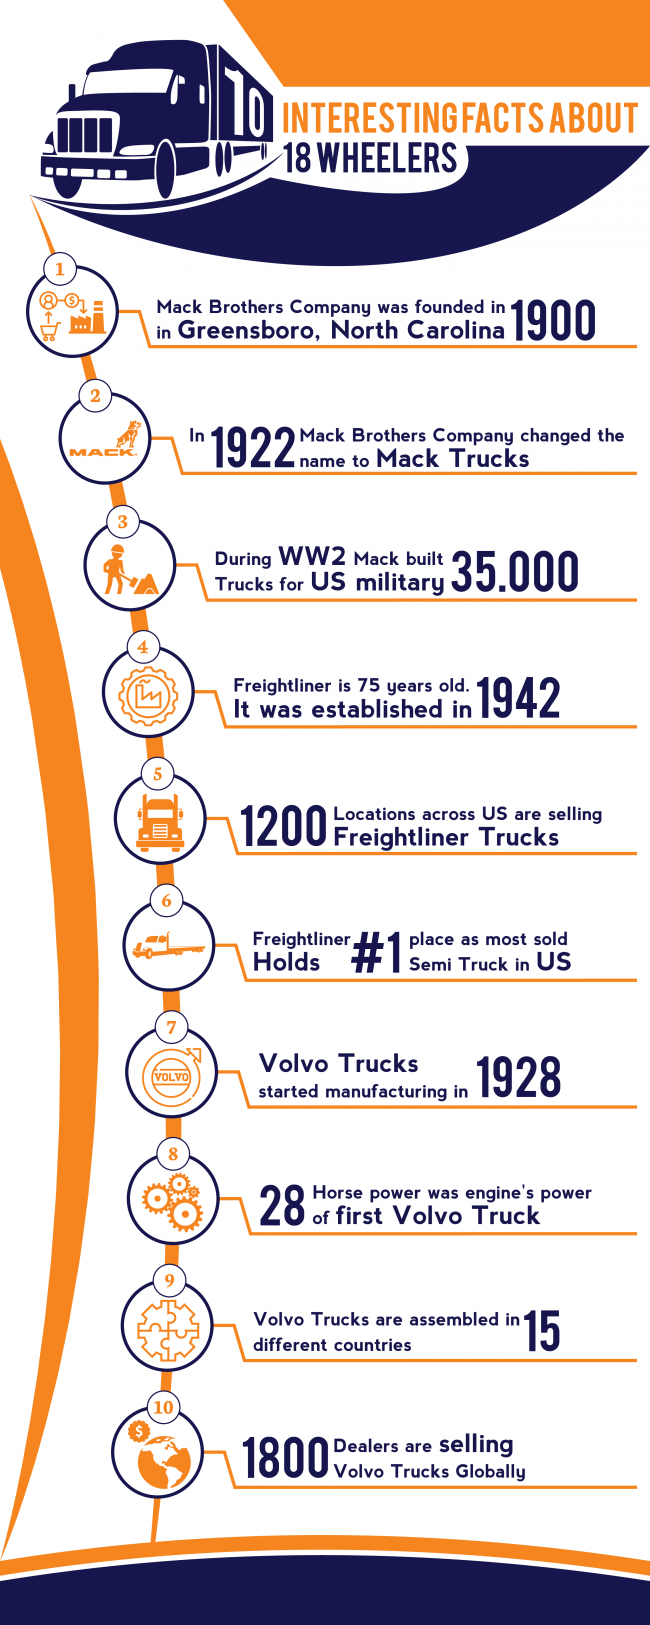 INFOGRAPHIC: 10 Interesting Facts About 18 Wheelers